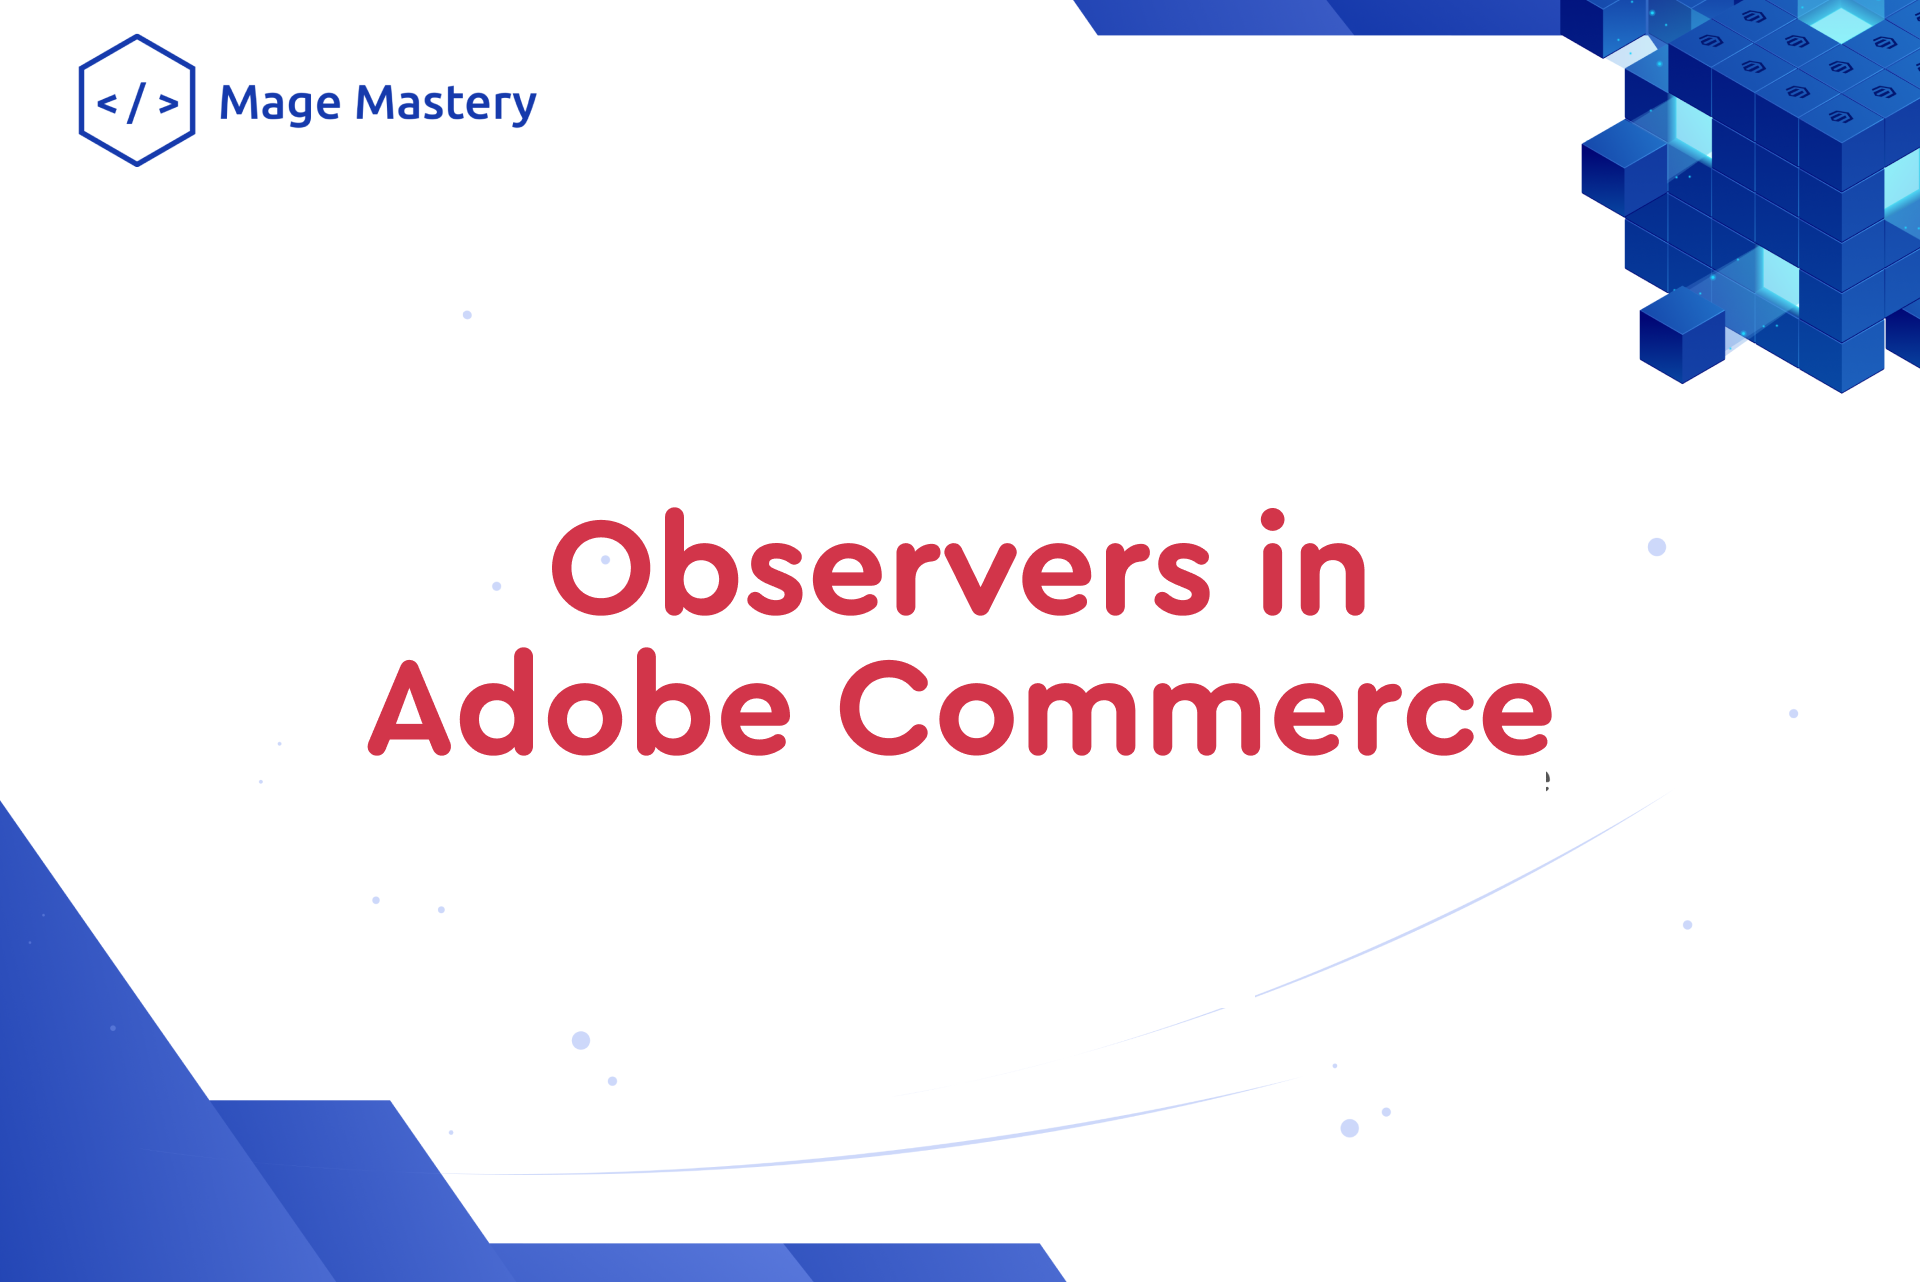 How I implement Observers in Adobe Commerce (Magento)